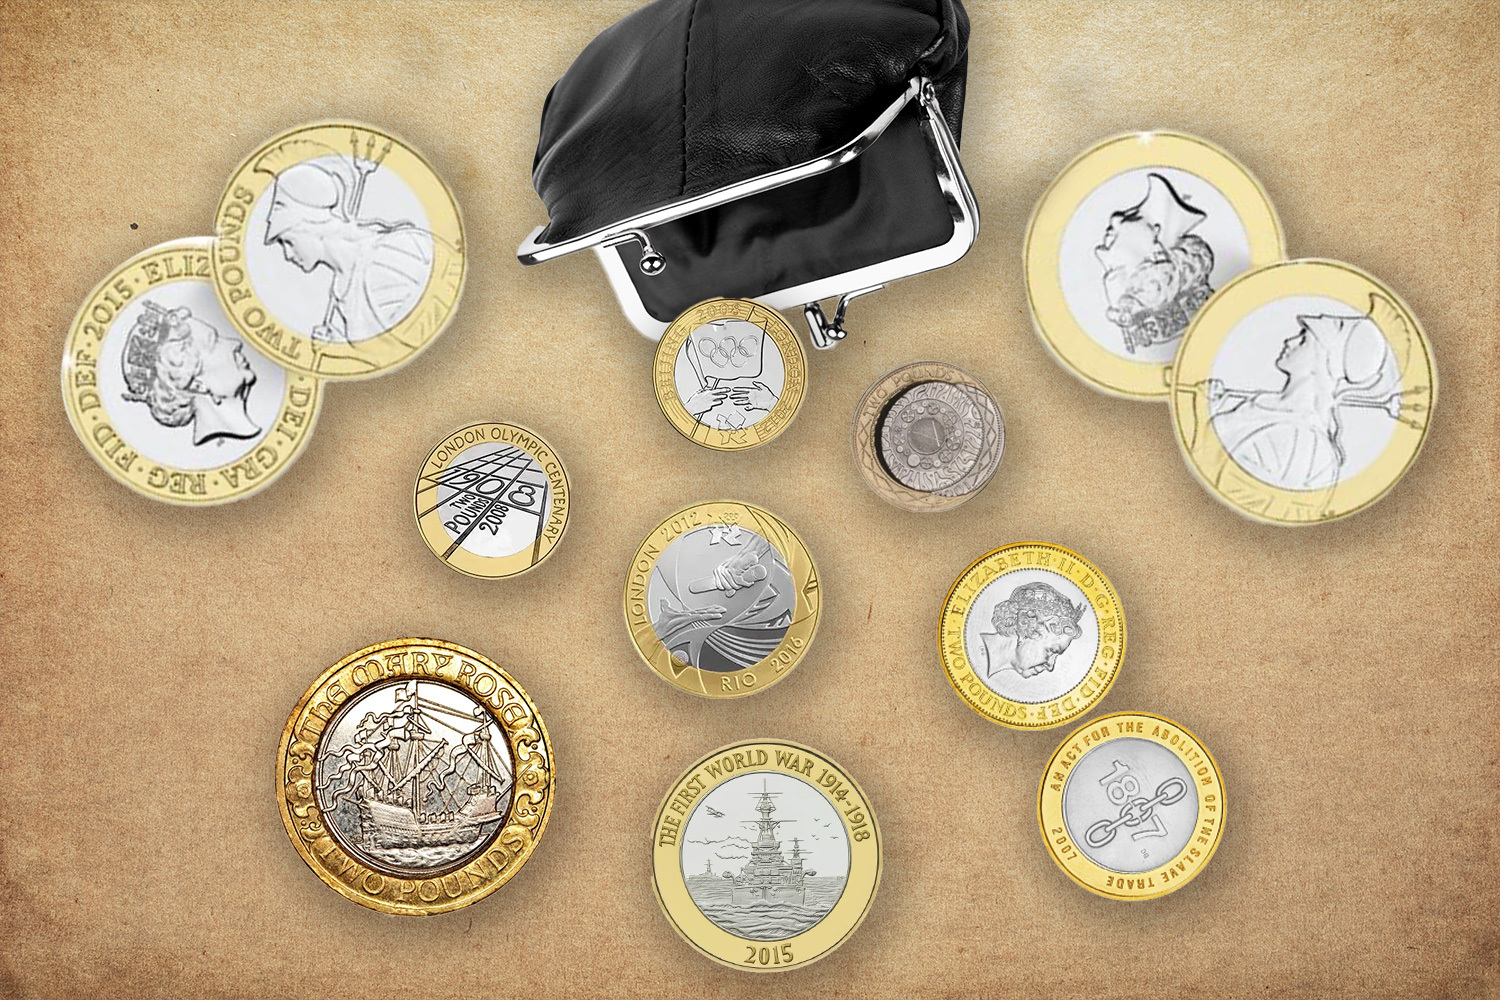 You could find a rare coin in your change that can sell for up to 130 times its face value